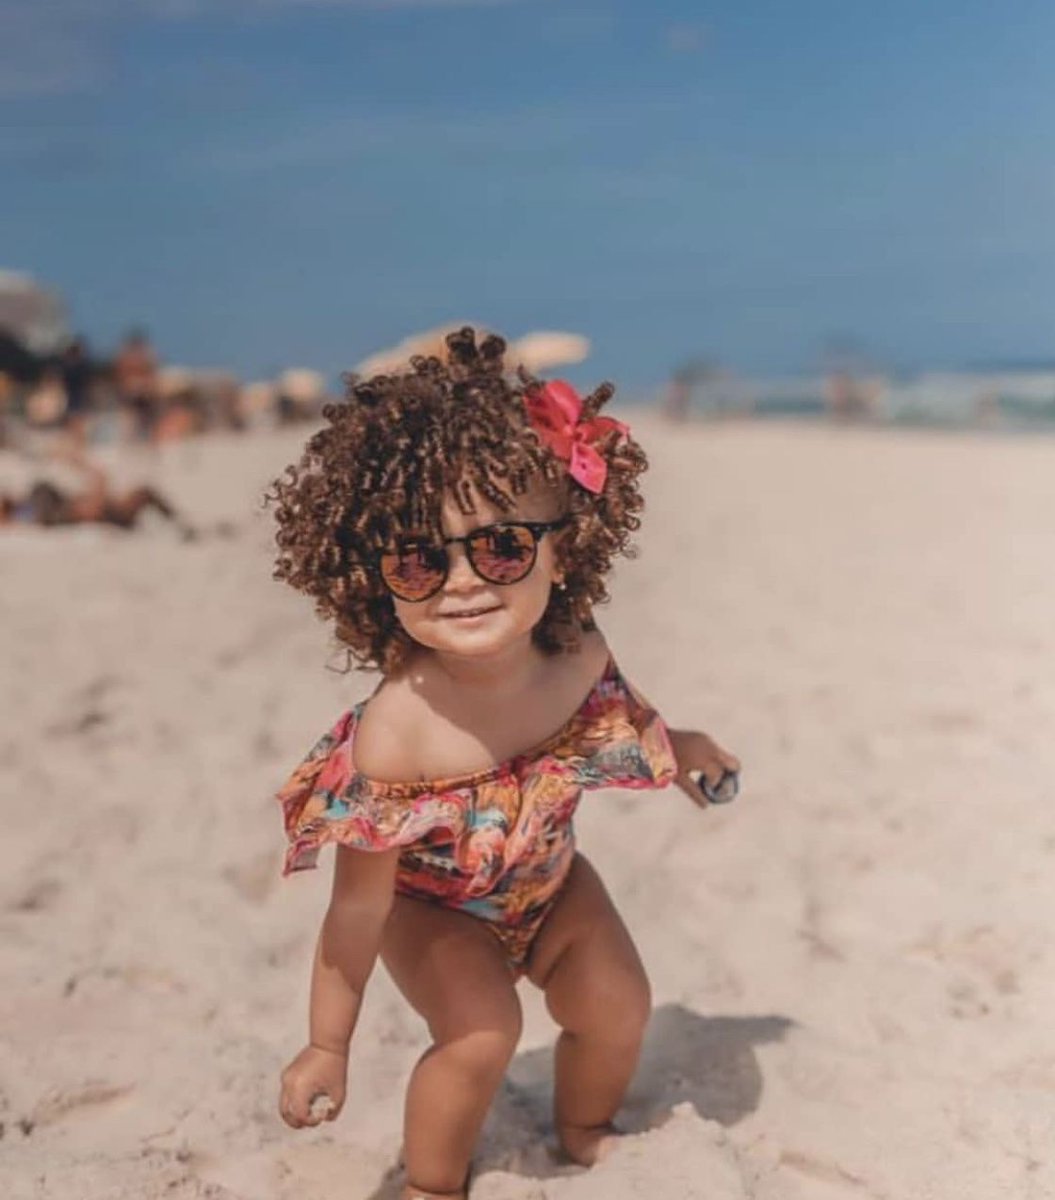 It’s warming up... and the curly babies are ready for a beach day!!! 🤗
#curlynaturalhair #curls #curly #curlsforthegirls #curlspoppin #curlsaunaturel #curlsgalore #curlscurlscurls #curlsunderstood #curlsgoals #curlcrush #curlsoncurls #blessedwithcurls #curlsrock #teamnatural